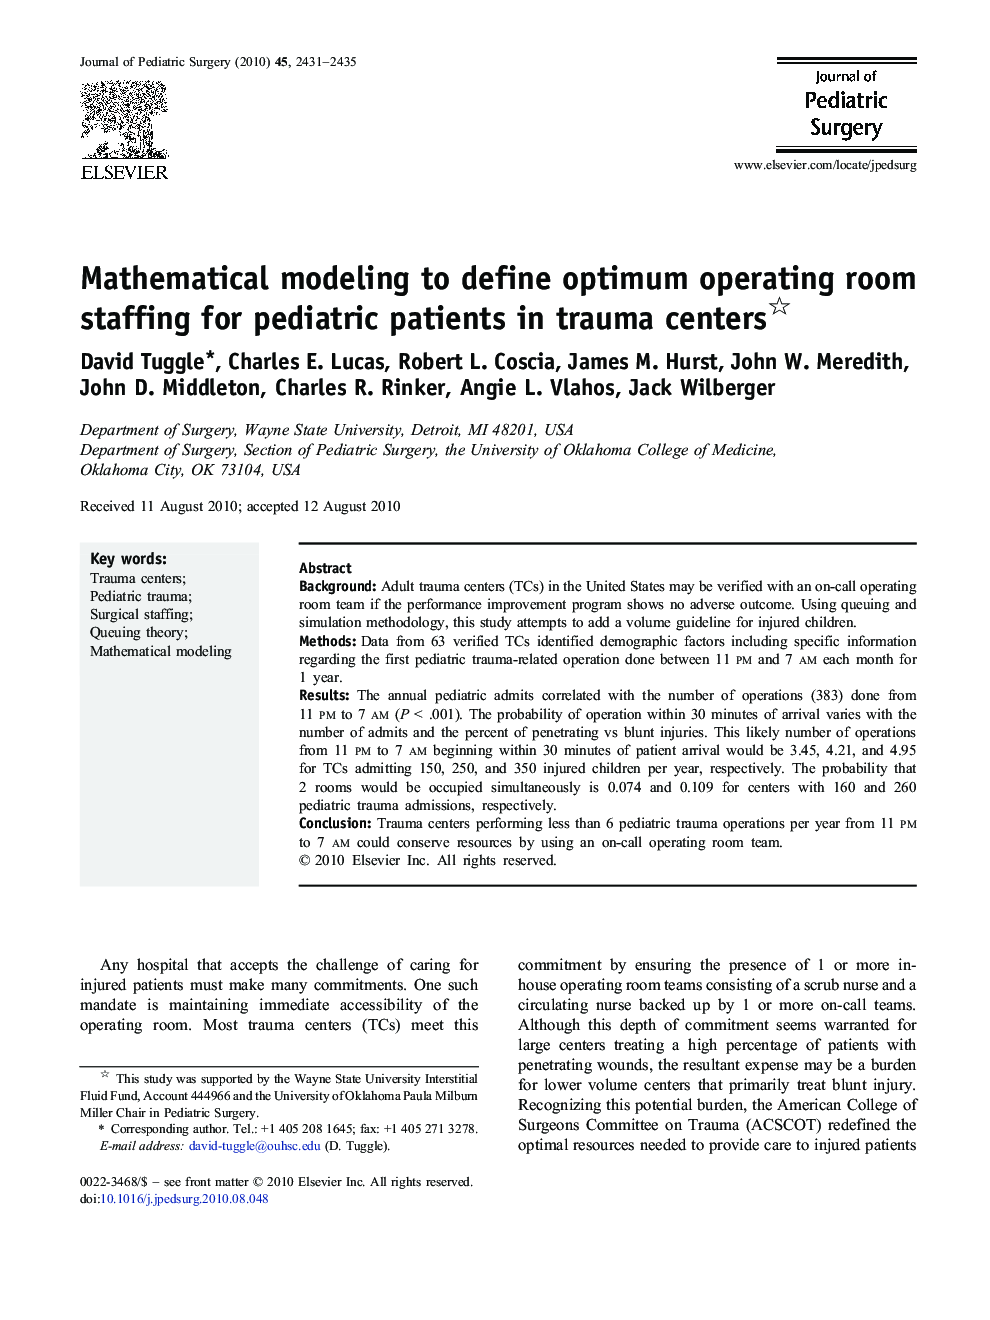 Mathematical modeling to define optimum operating room staffing for pediatric patients in trauma centers 